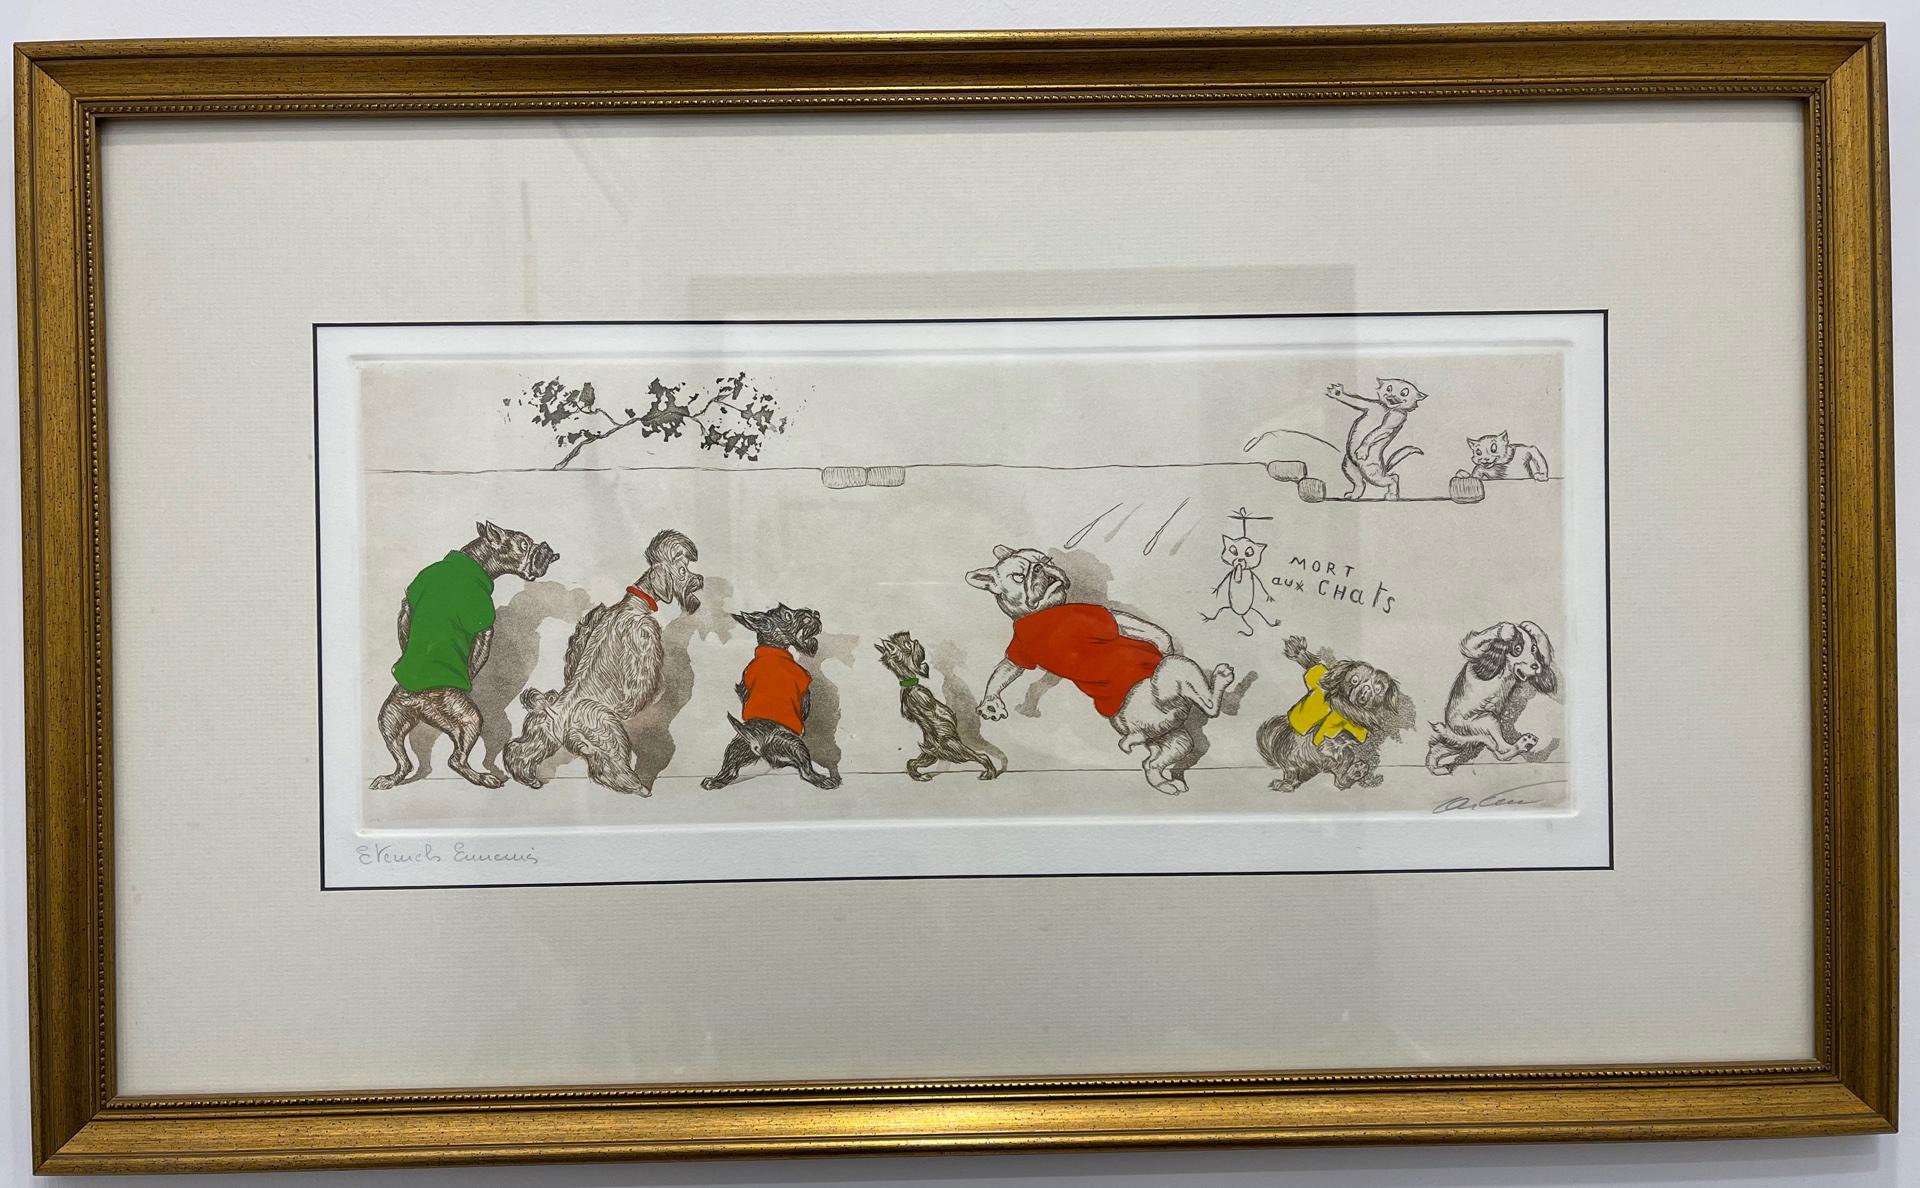 Amusing Mid-Century Modern 3 original signed etchings by the Iconic artist Boris O'Klein. Professionally framed in a gilt frame with matting. Each Etching signed in the lower right corner (except: Reviens! Choquette”) and titled in the lower left